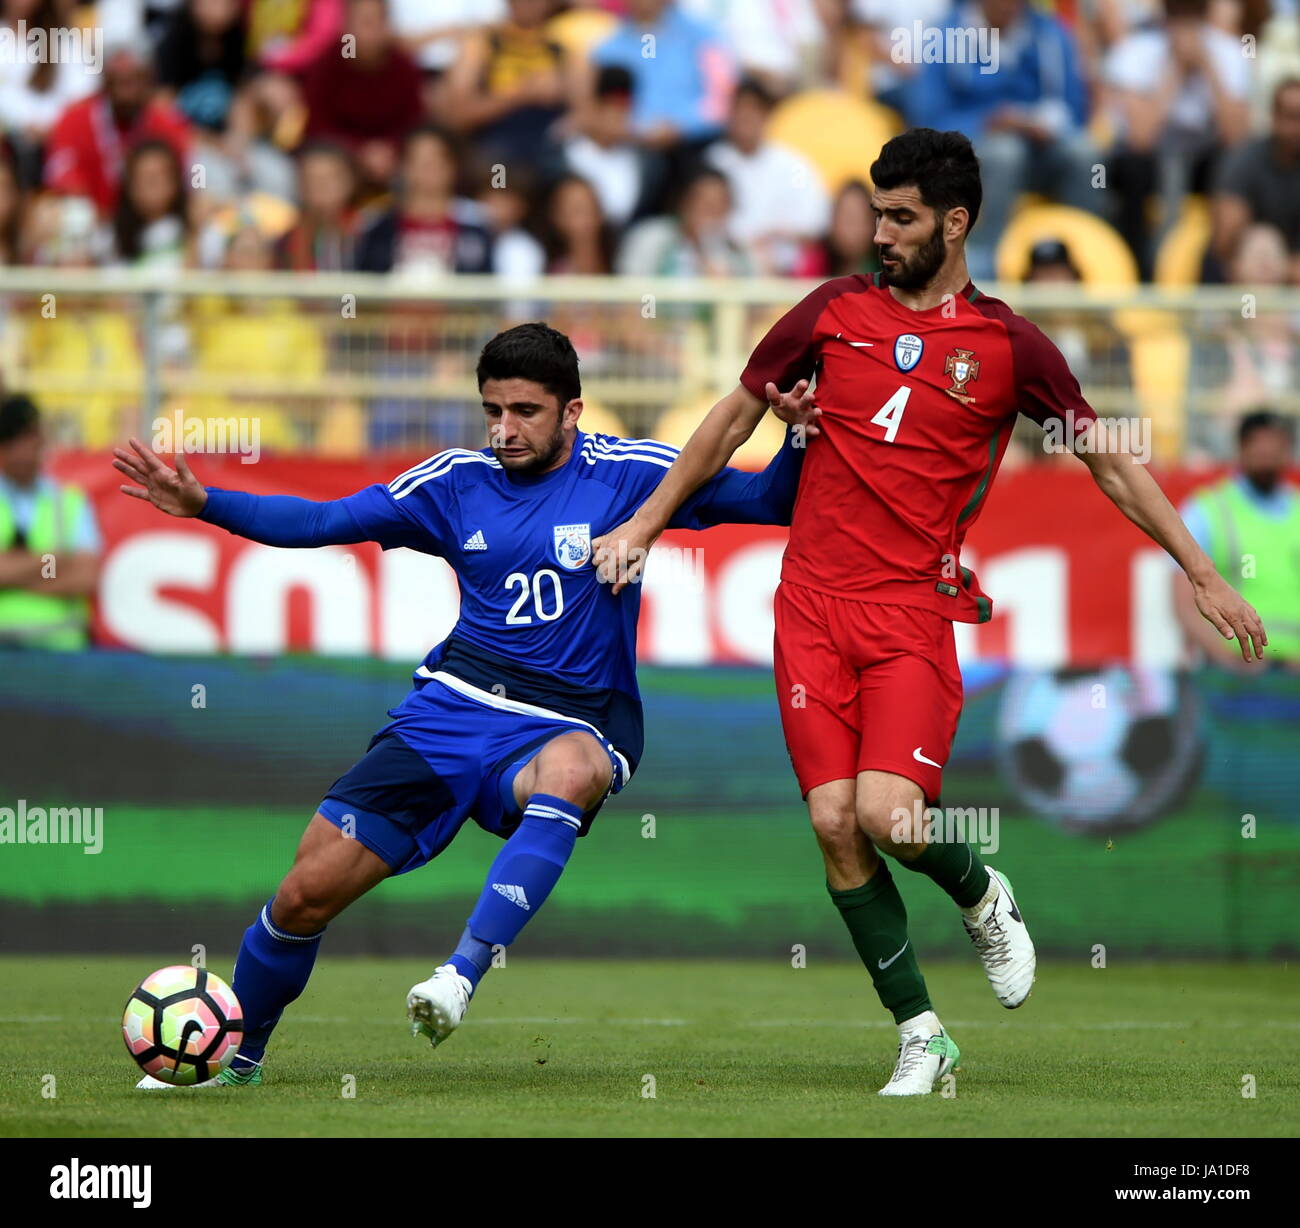 Lisbon, Lisbon. 3rd June, 2017. Portugal's Luis Neto (R) vies with Giorgos Economides of Cyprus during the international friendly soccer match Portugal vs Cyprus at the Antonio Coimbra da Mota stadium in Estoril town, outskirts of Lisbon, on June 3, 2017. Portugal won 4-0. Credit: Zhang Liyun/Xinhua/Alamy Live News Stock Photo